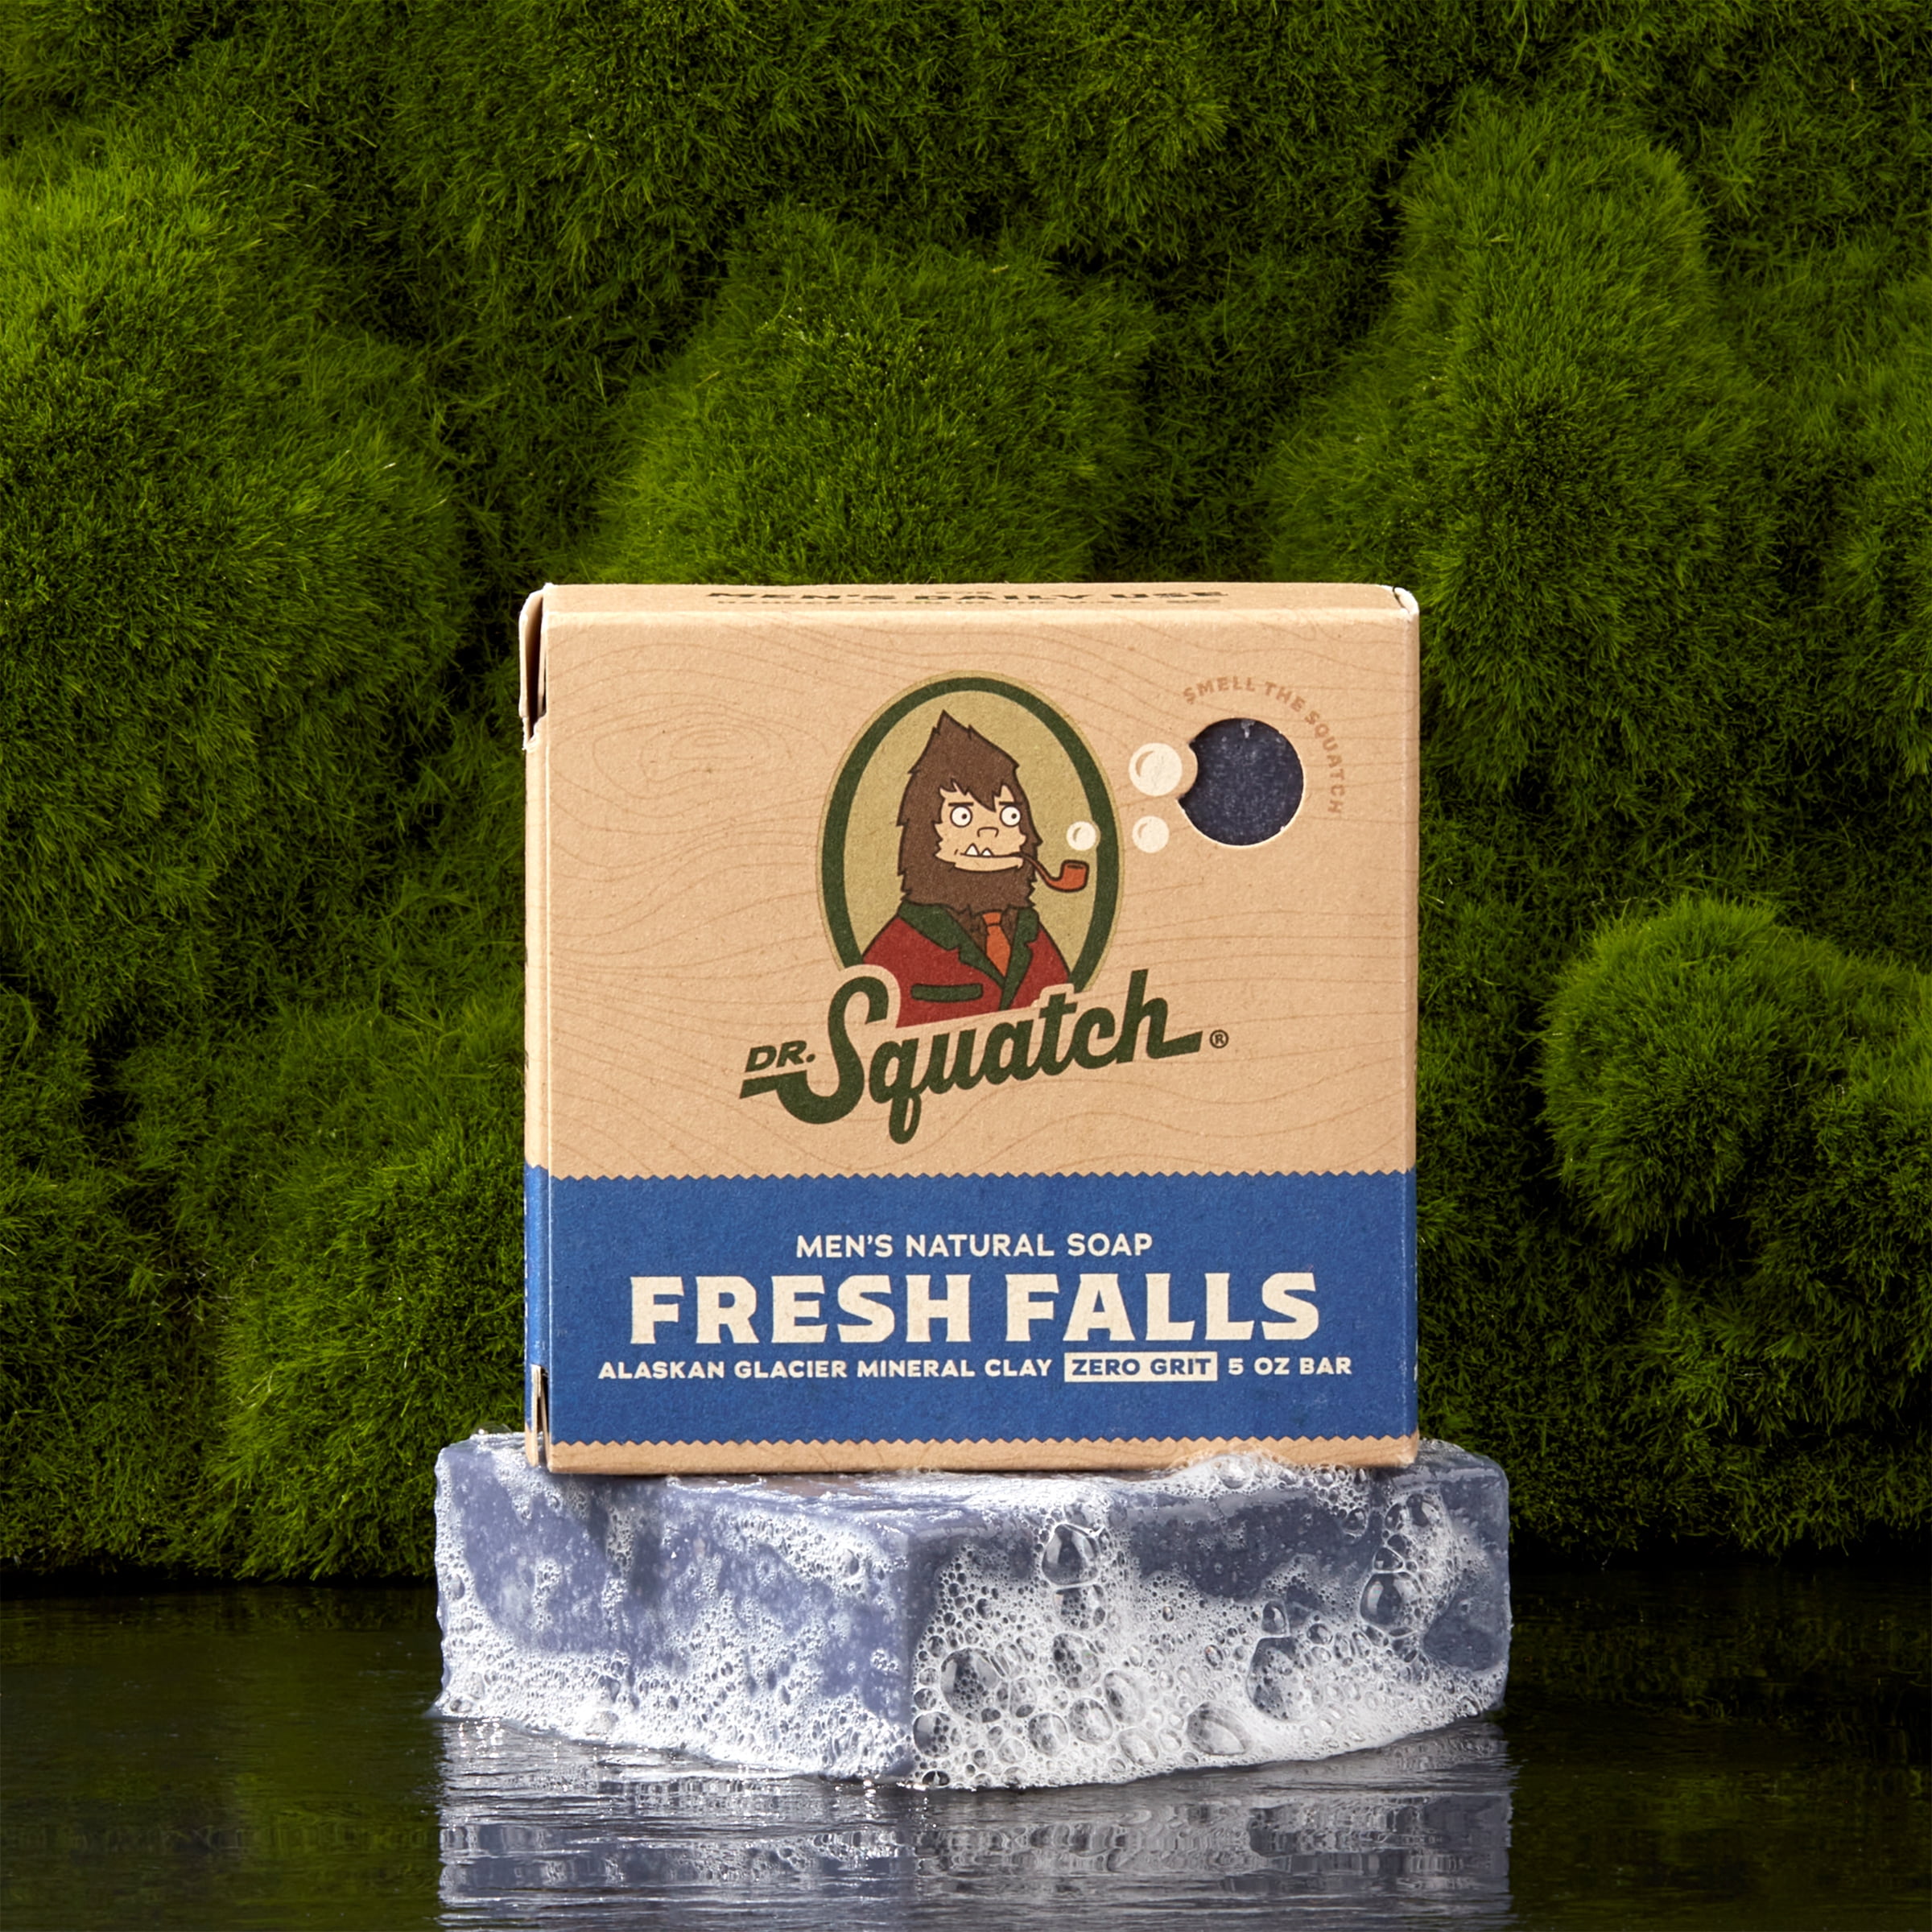 Dr. Squatch - 💦 RESTOCKED 💦 Fresh falls is finally back! Get yours today  click the link